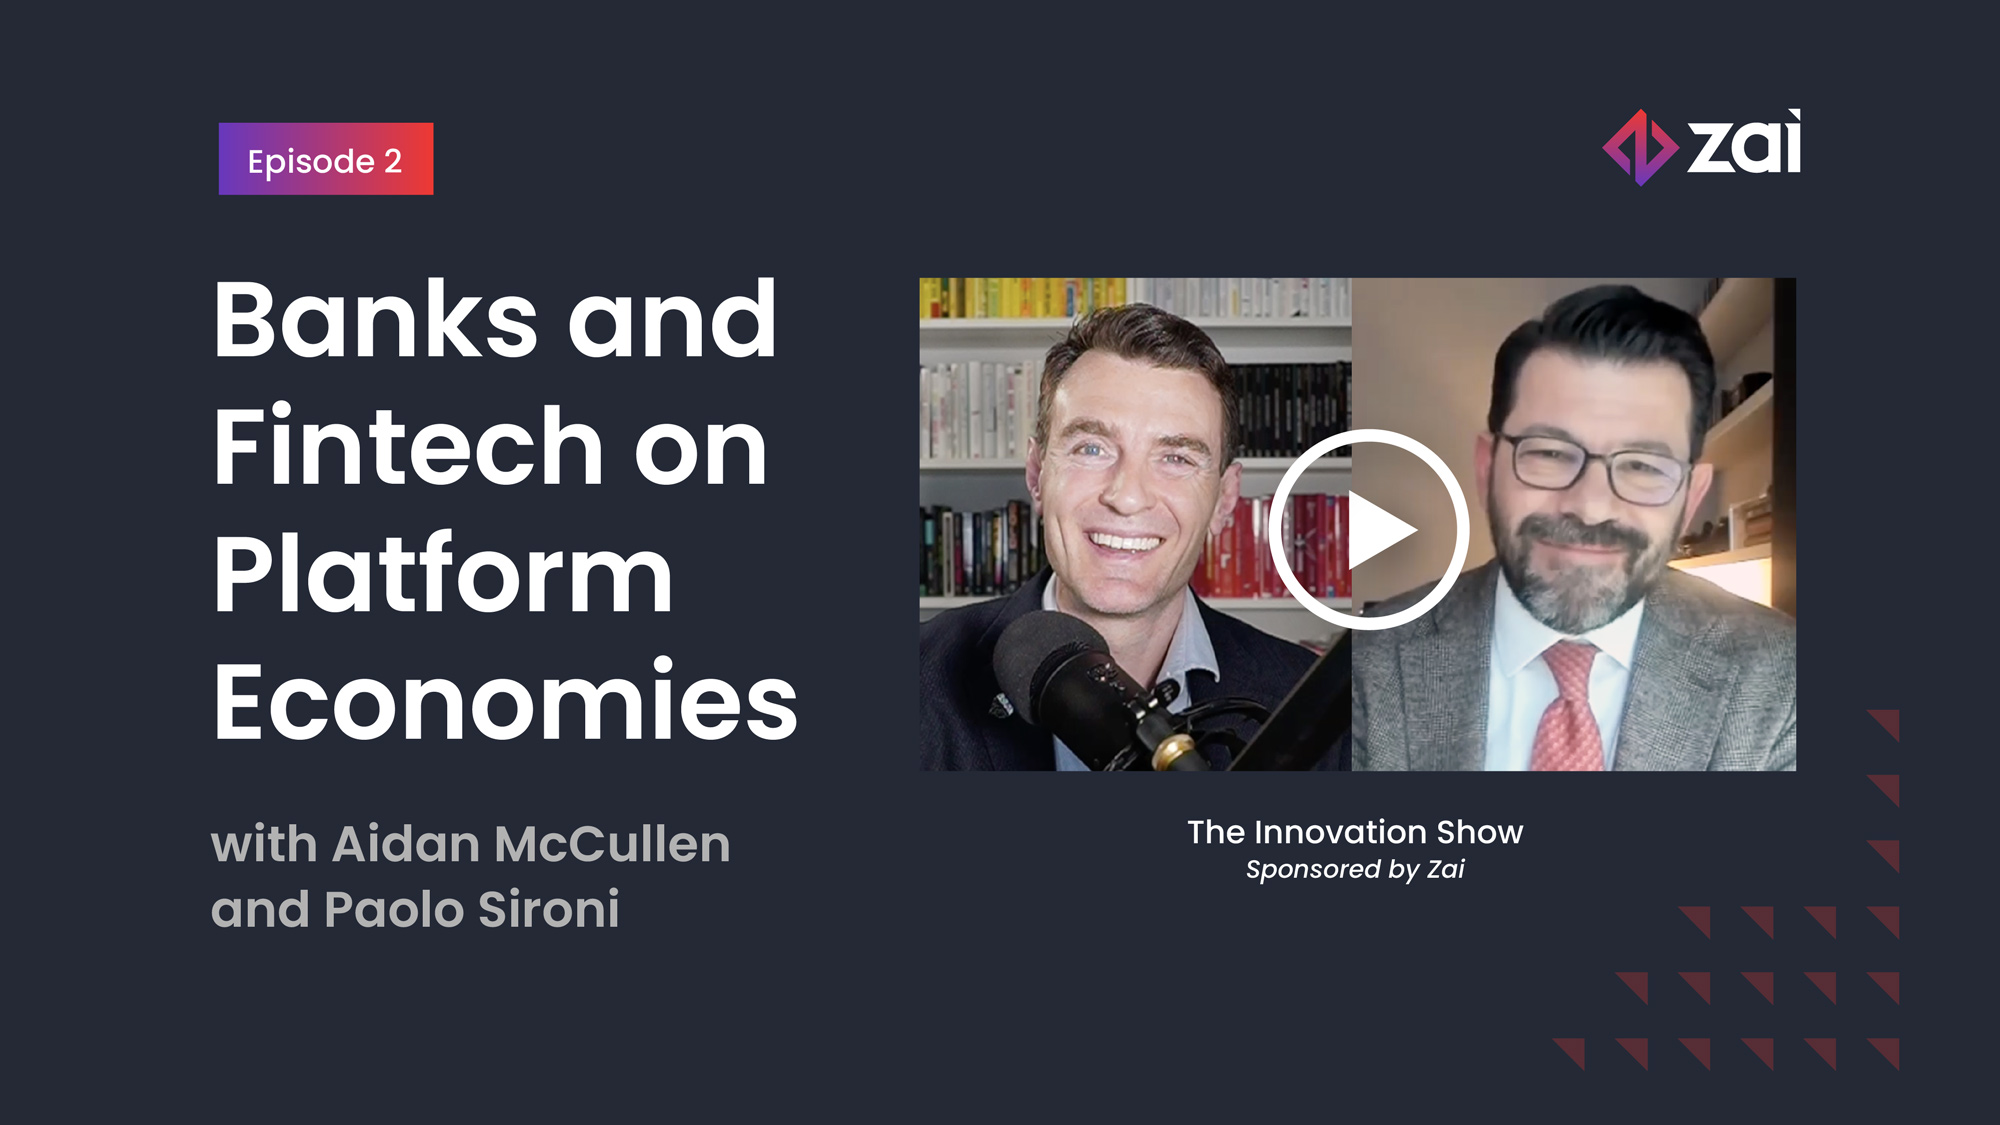 Part II: Paolo Sironi podcast with Aidan McCullen of The Innovation Show